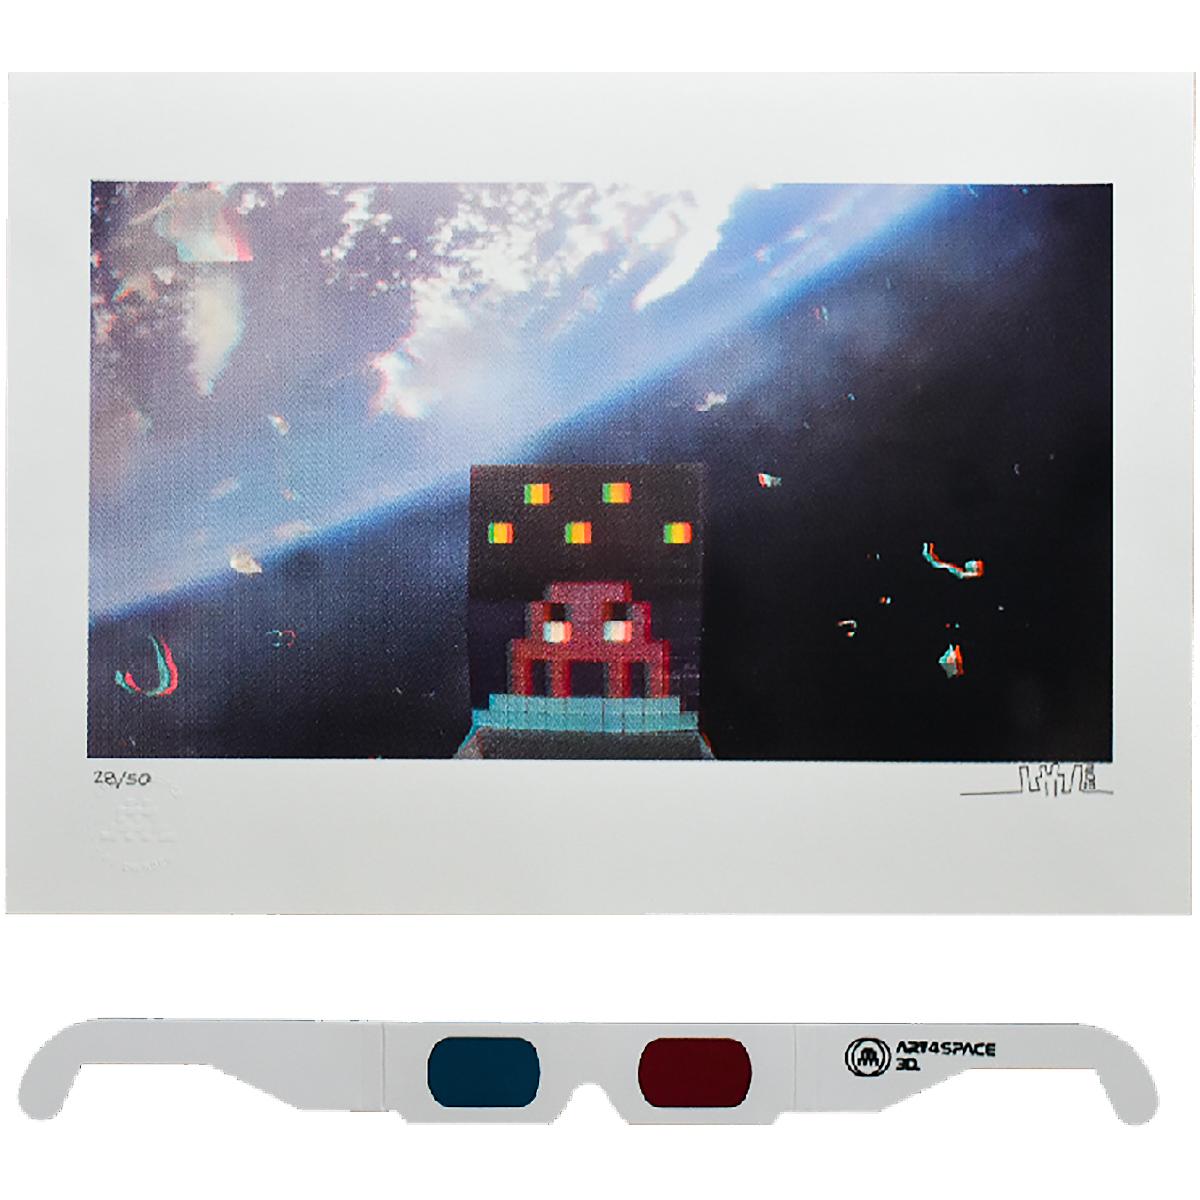 Super rare and complete with original 3D glasses as issued.
Limited edition of only 50 of 3D version made.
Very cool effect when print is viewed with the glasses.
Hand signed by Invader and has Invader emboss with Invader that reads “Made in Space